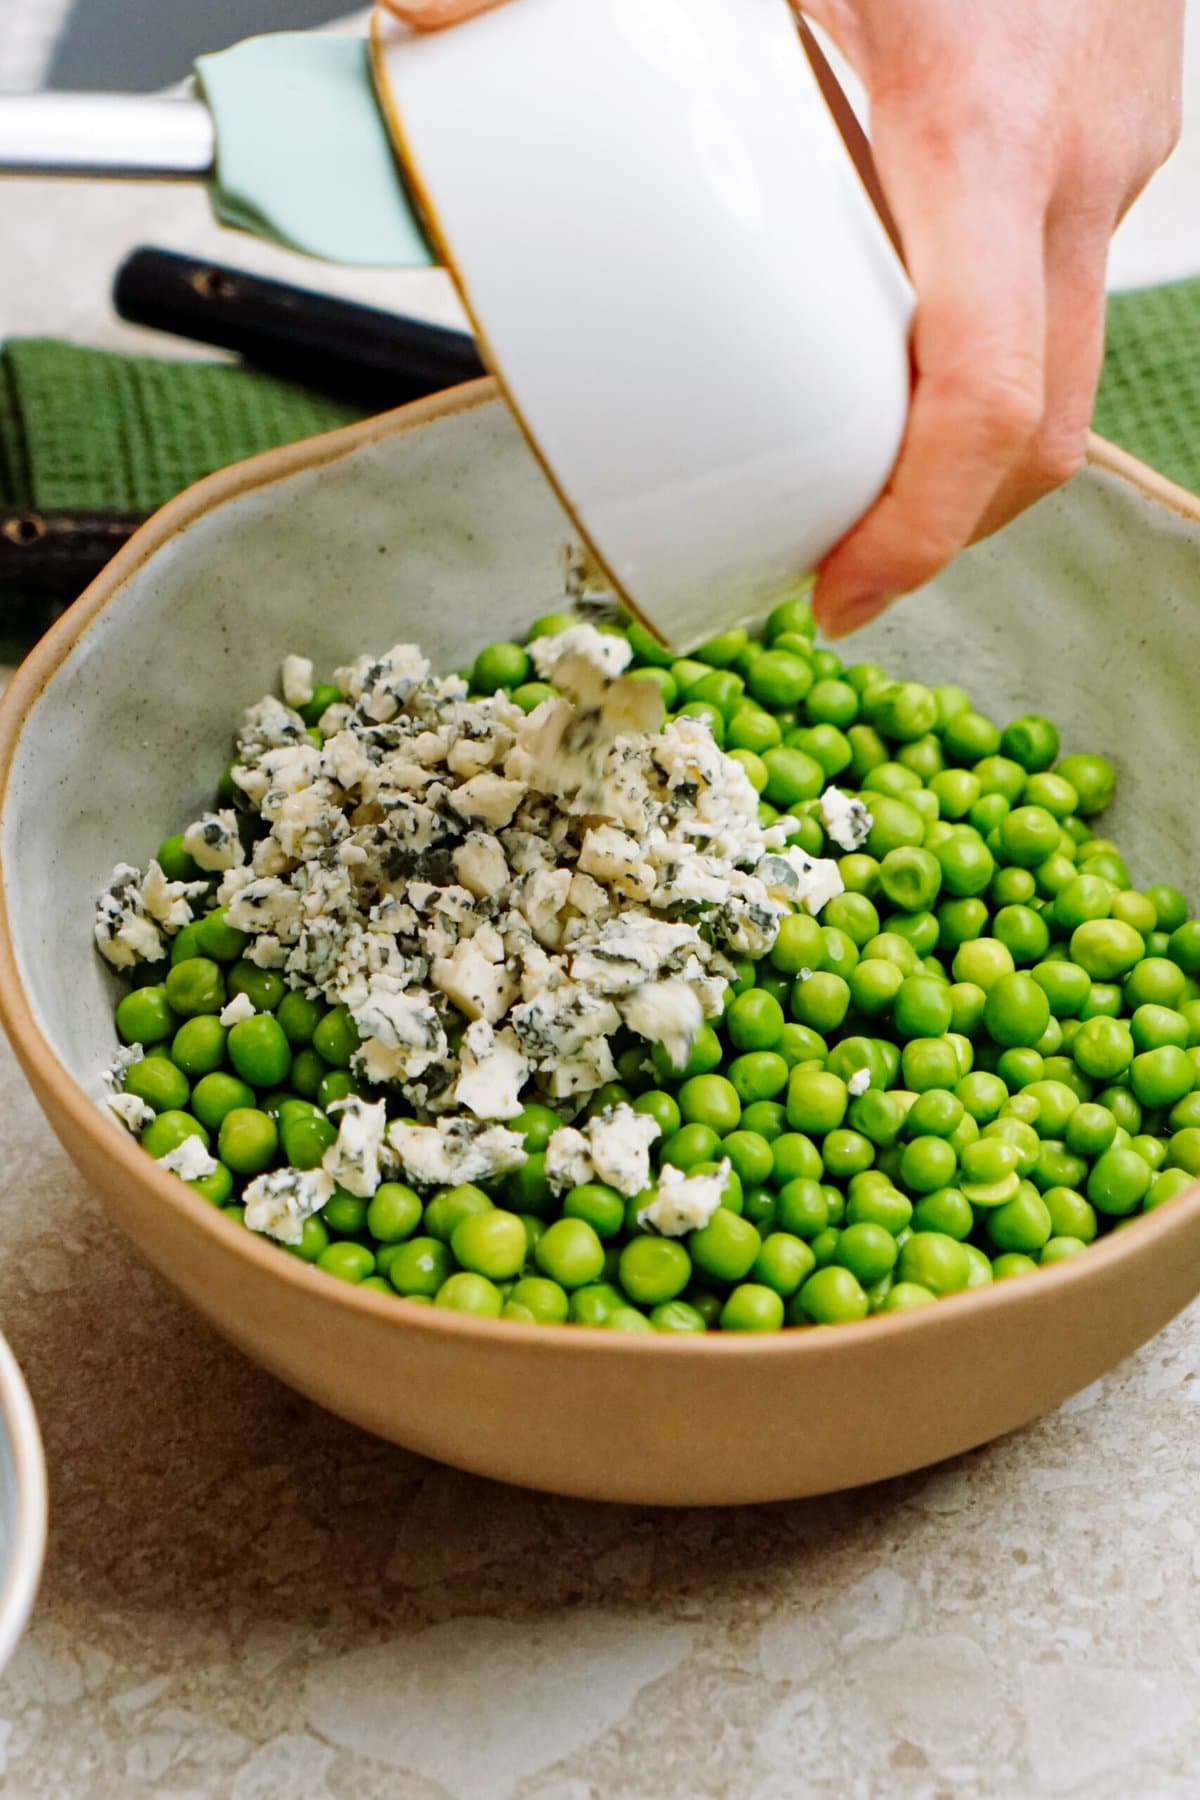 Pouring crumbled cheese onto a bowl of green pea salad.